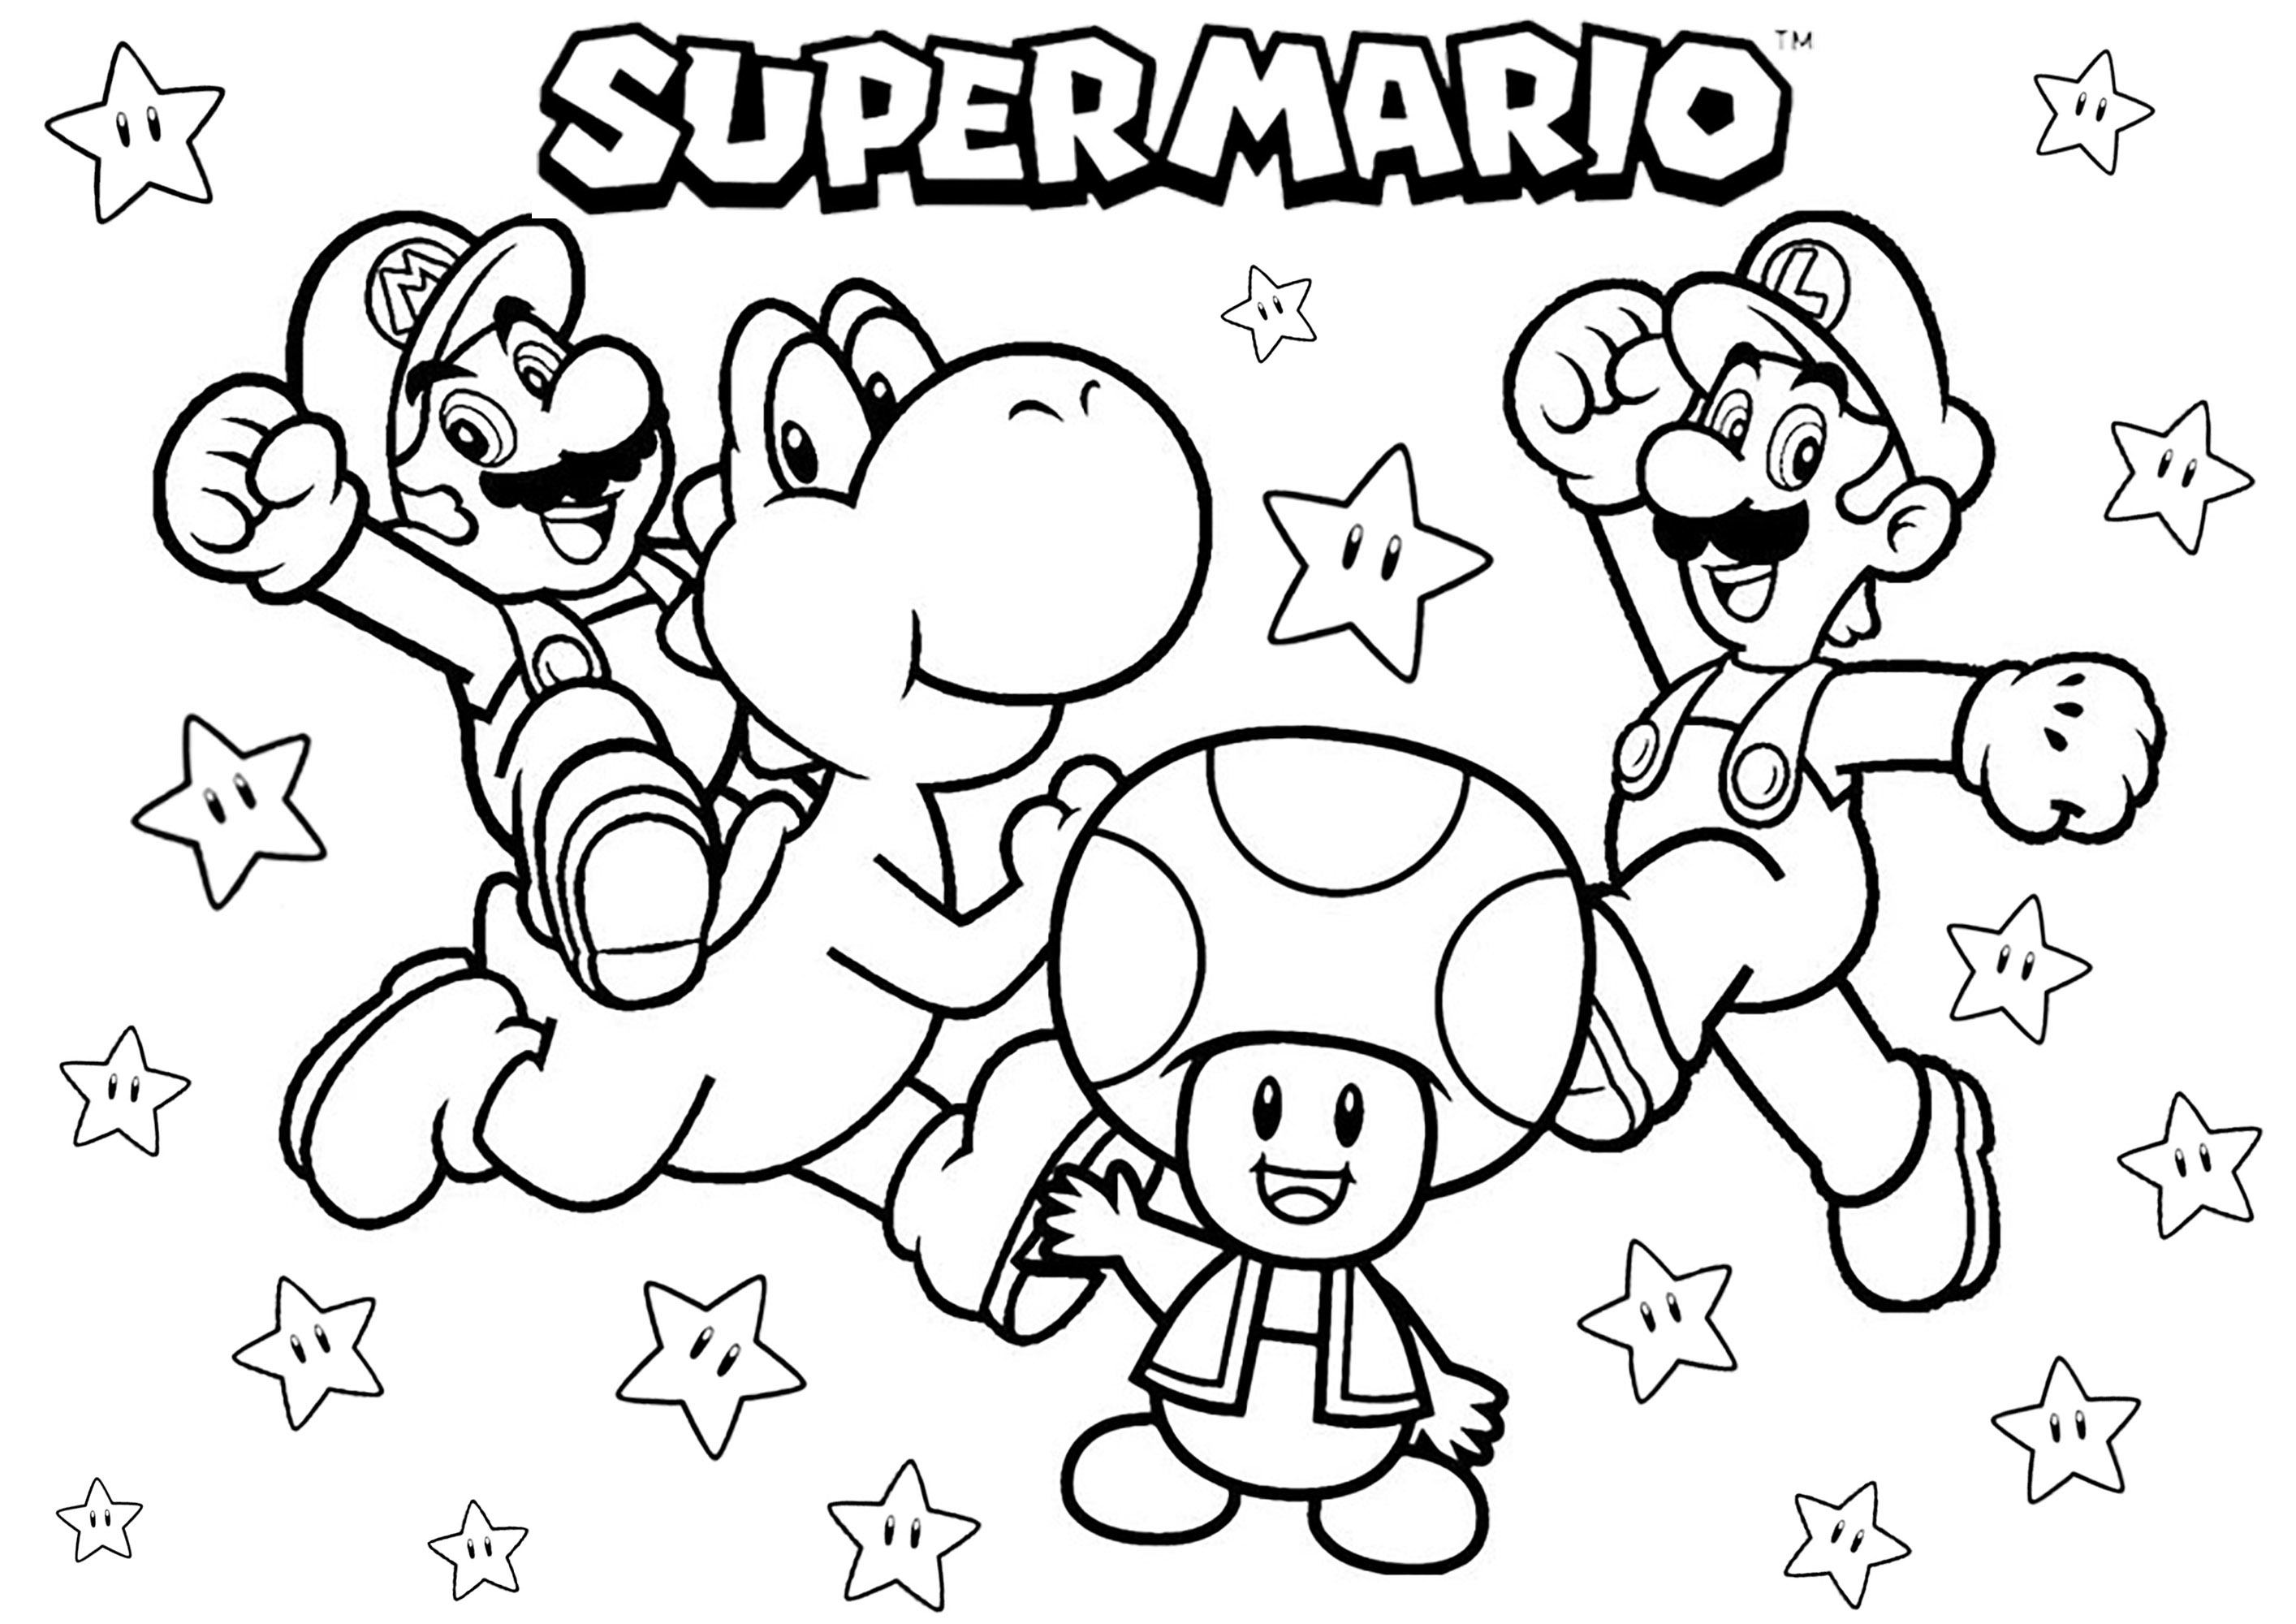 Mario, Luigi, Yoshi et Toad à colorier. Remember the days when you played Super Mario on your Nintendo system, thanks to this cute coloring page with the Mario and Luigi brothers, the dinosaur Yoshi and the mushroom Toad ... not to mention lots of stars!